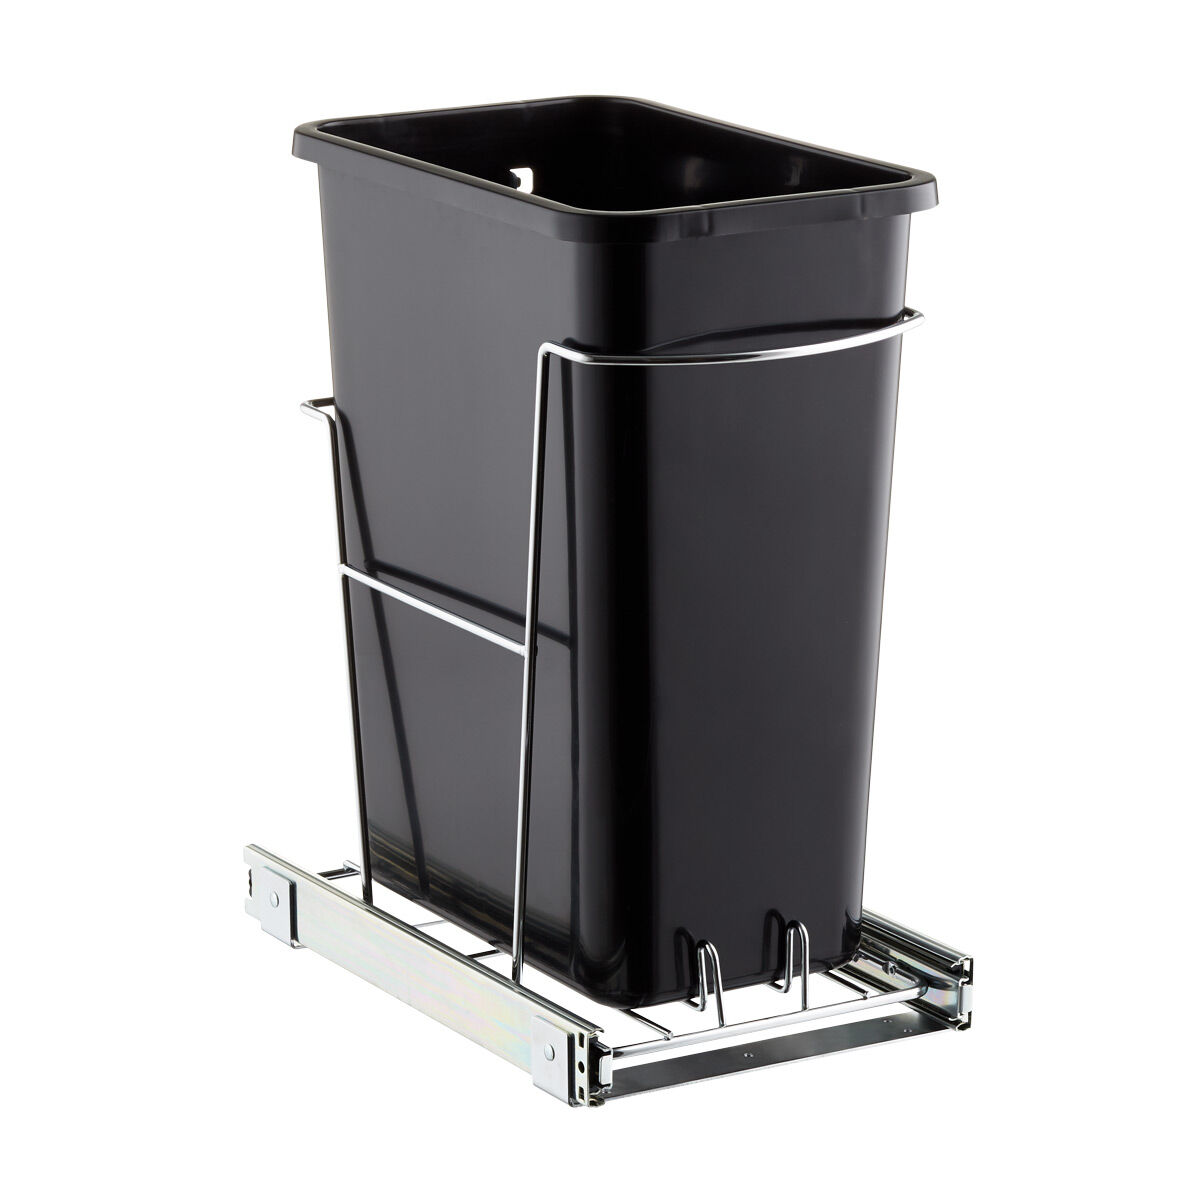 The Container Store 8 gal . Pull Out Trash Can Black